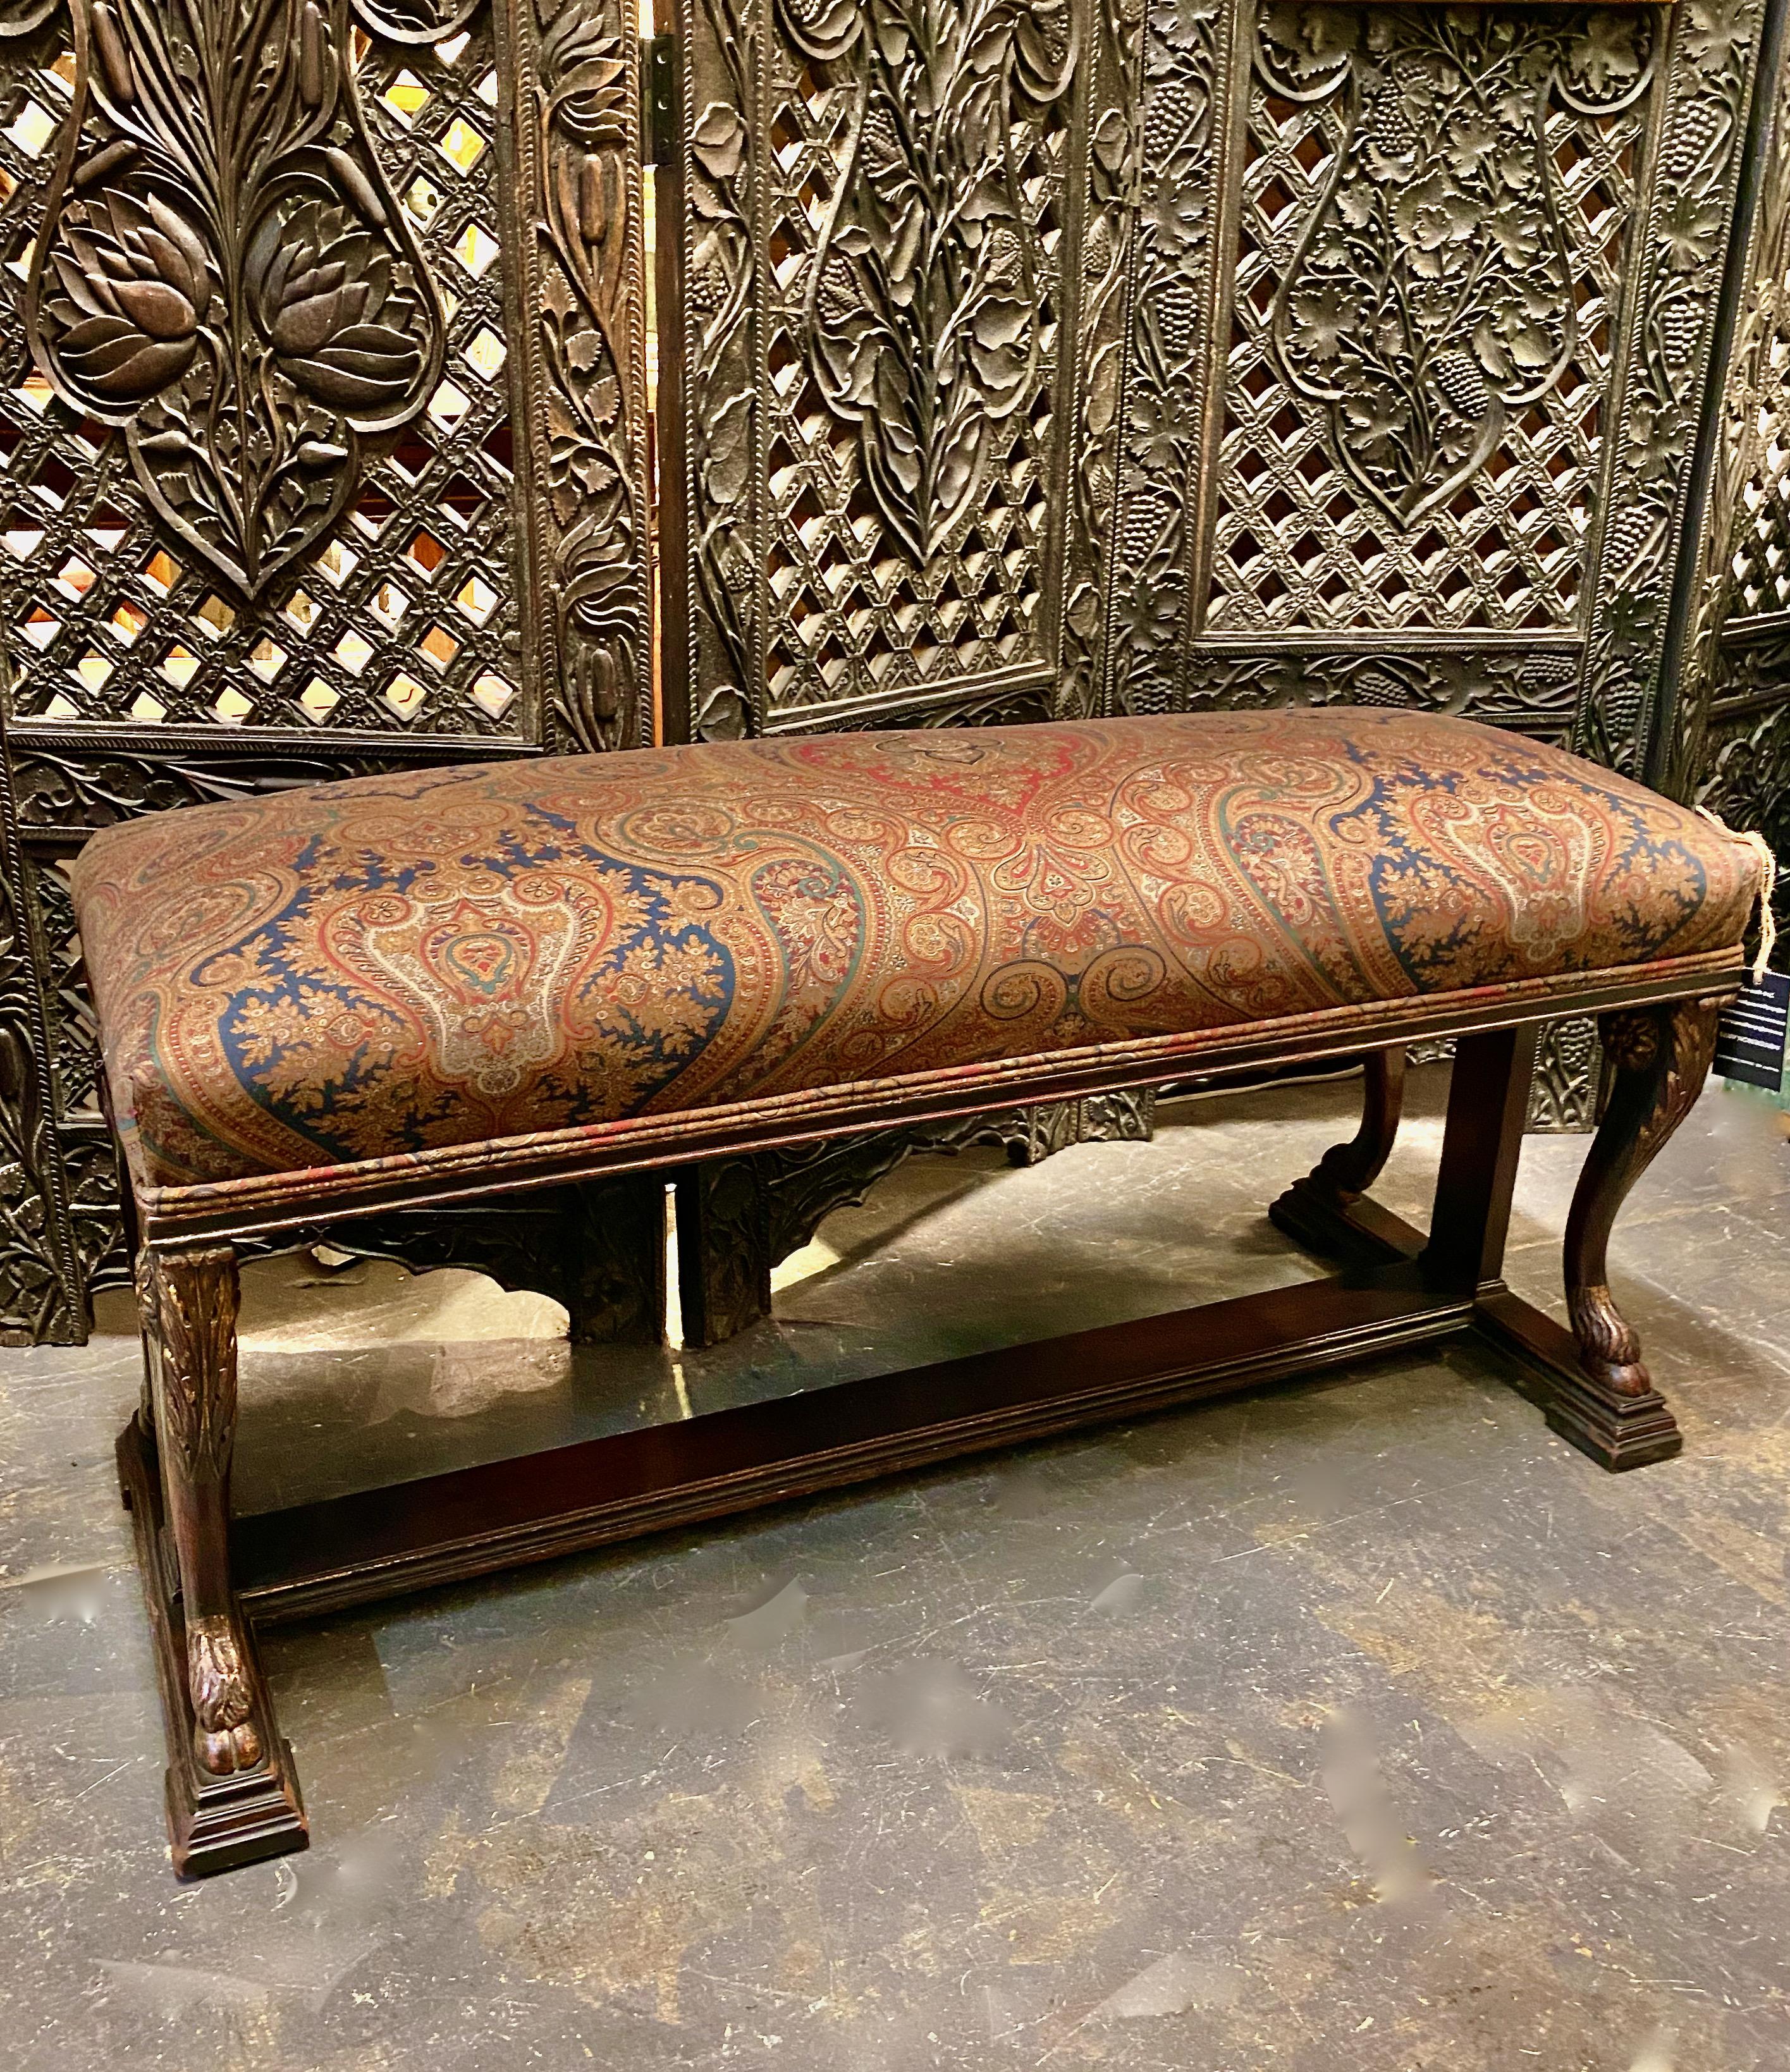 This a good example of an early 20th century Louis XIV or baroque style upholstered bench. The mahogany bench is carved in a masculine form with hairy hoofed feet, acanthus leaf knees, rosettes and stylized ionic columns. It is newly upholstered in